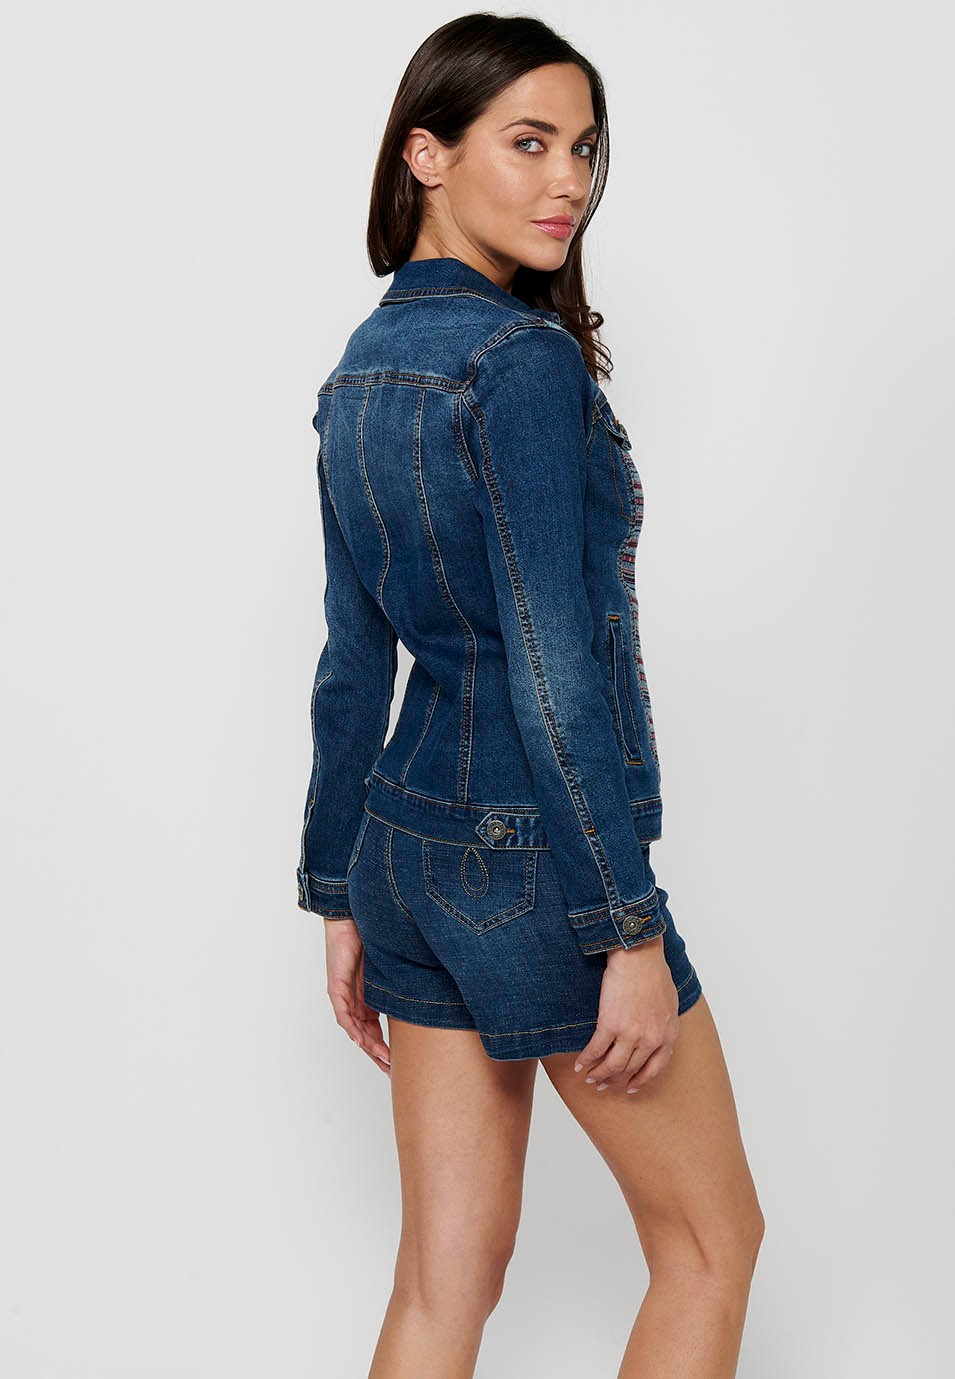 Long-sleeved denim jacket with ethnic fabric detail and front closure with blue buttons for women 3